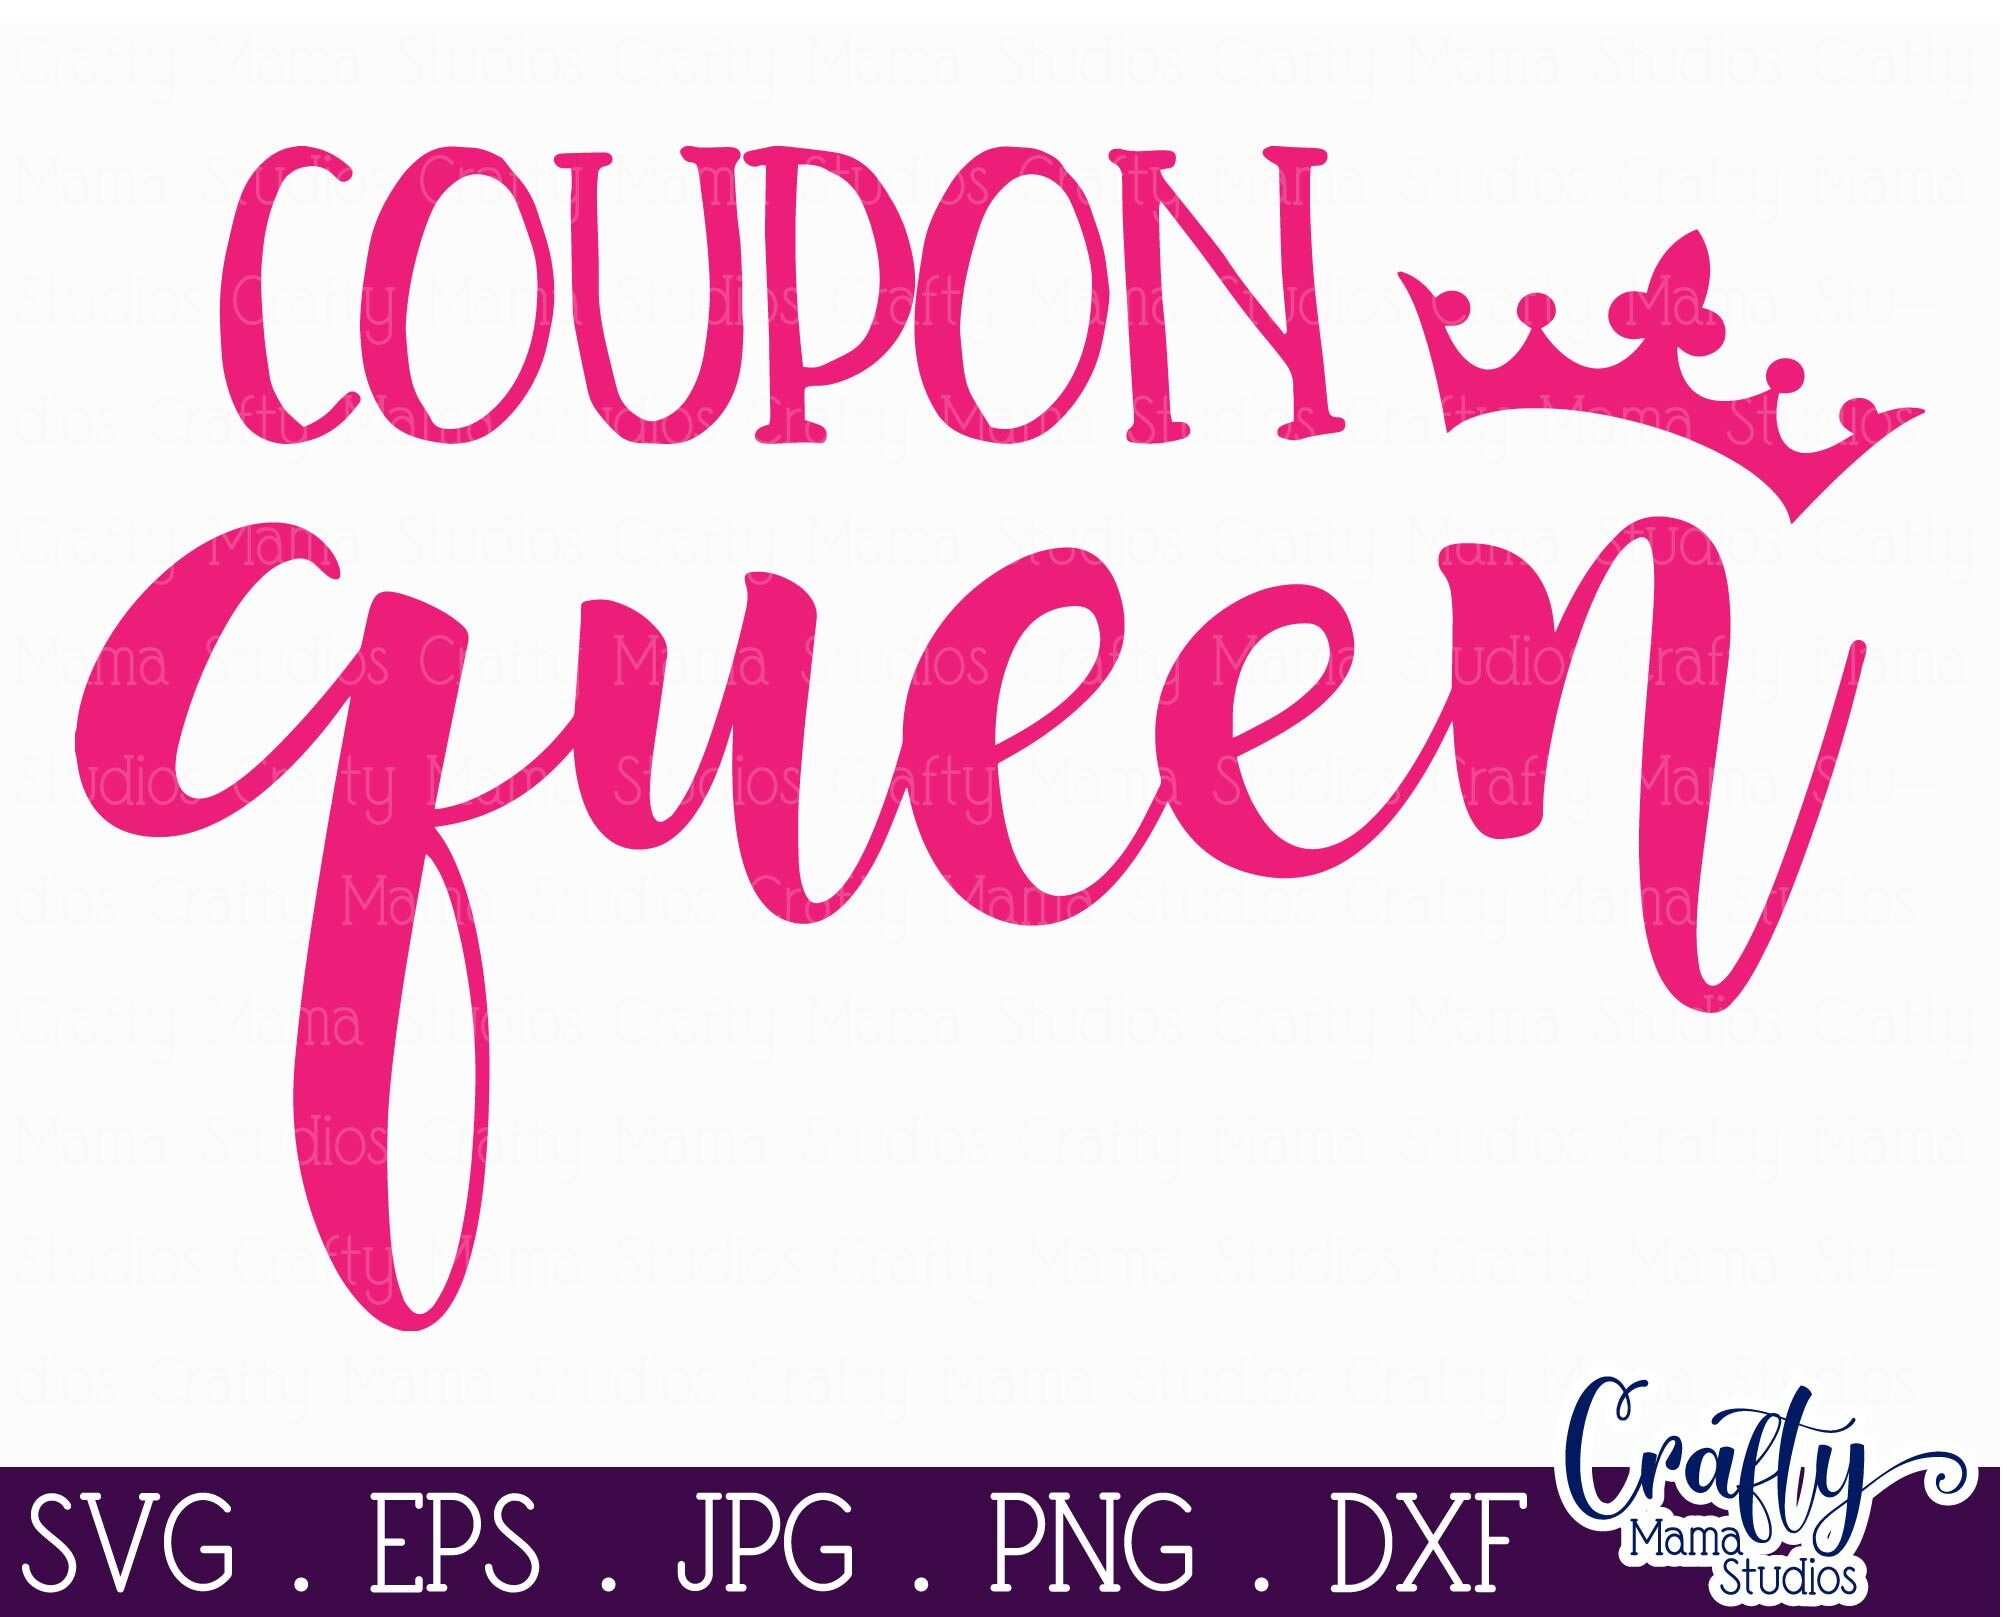 Download Coupon Queen Svg Mom Life Svg Girl Power Svg By Crafty Mama Studios Thehungryjpeg Com